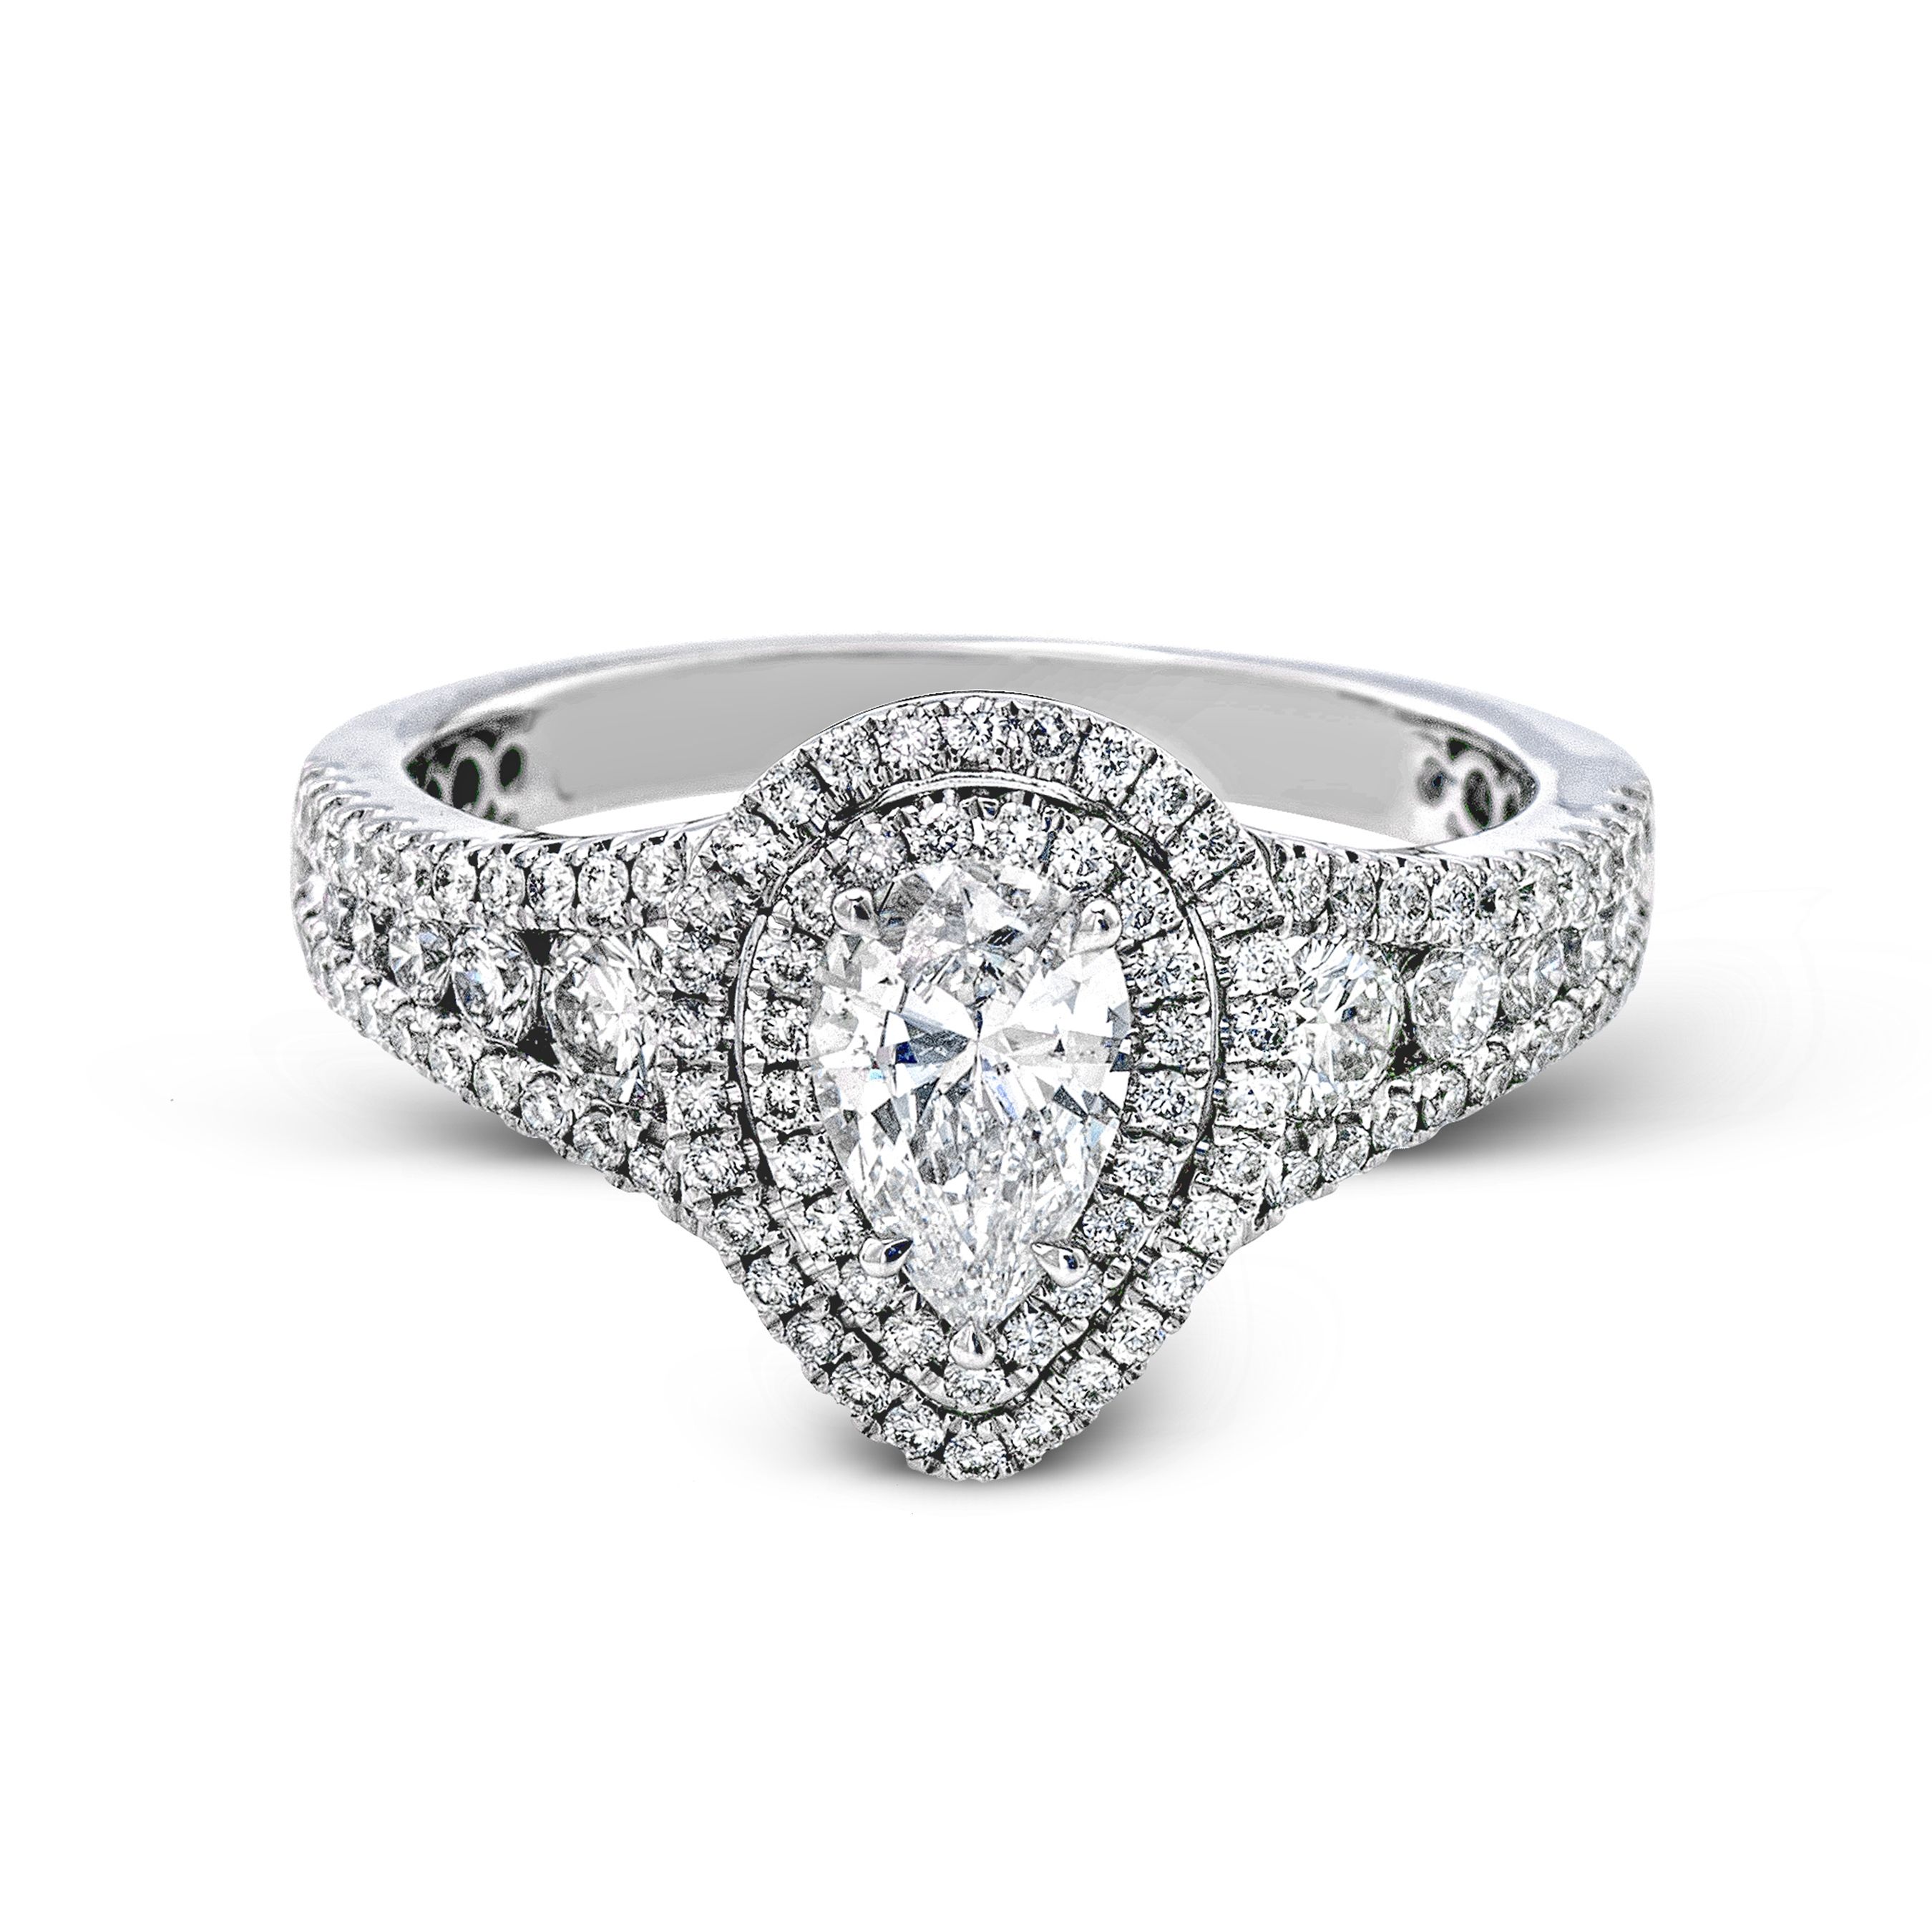 MR2592 Passion Collection White Gold Pear Cut Engagement Ring